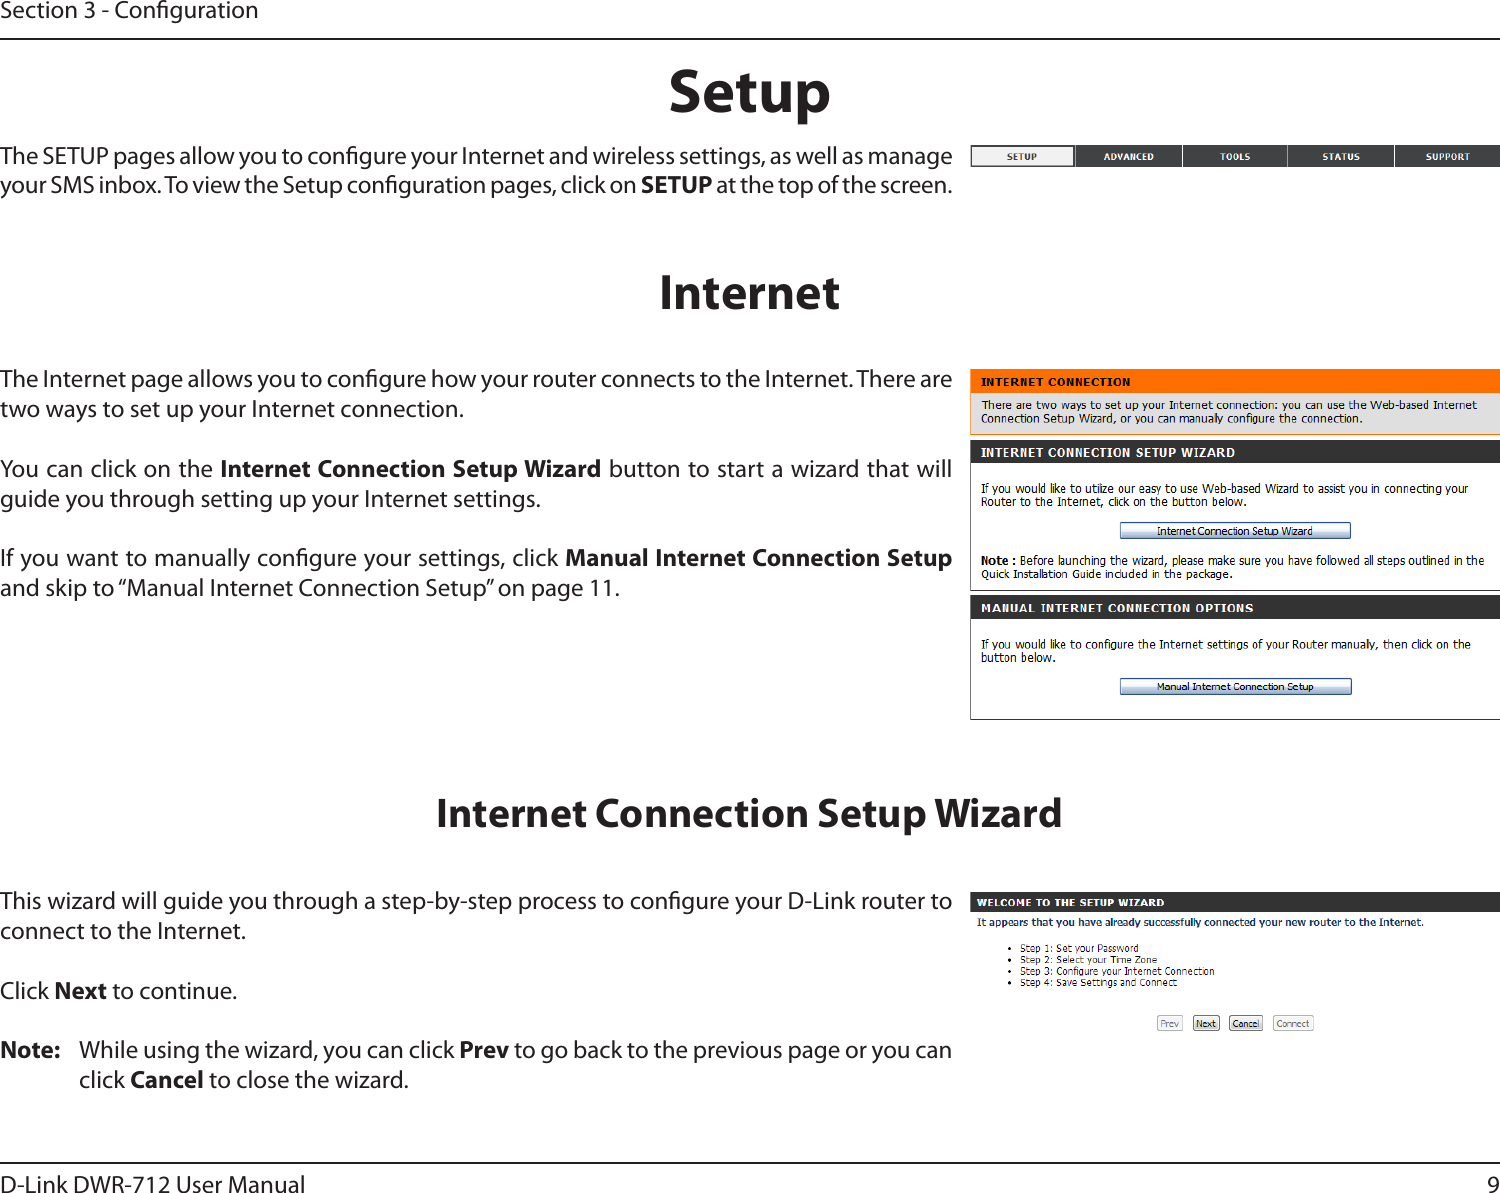 9D-Link DWR-712 User ManualSection 3 - CongurationSetupThis wizard will guide you through a step-by-step process to congure your D-Link router to connect to the Internet.Click Next to continue.Note:  While using the wizard, you can click Prev to go back to the previous page or you can click Cancel to close the wizard.Internet Connection Setup WizardThe SETUP pages allow you to congure your Internet and wireless settings, as well as manage your SMS inbox. To view the Setup conguration pages, click on SETUP at the top of the screen.The Internet page allows you to congure how your router connects to the Internet. There are two ways to set up your Internet connection. You can click on the Internet Connection Setup Wizard button to start a wizard that will guide you through setting up your Internet settings.If you want to manually congure your settings, click Manual Internet Connection Setup and skip to “Manual Internet Connection Setup” on page 11.Internet